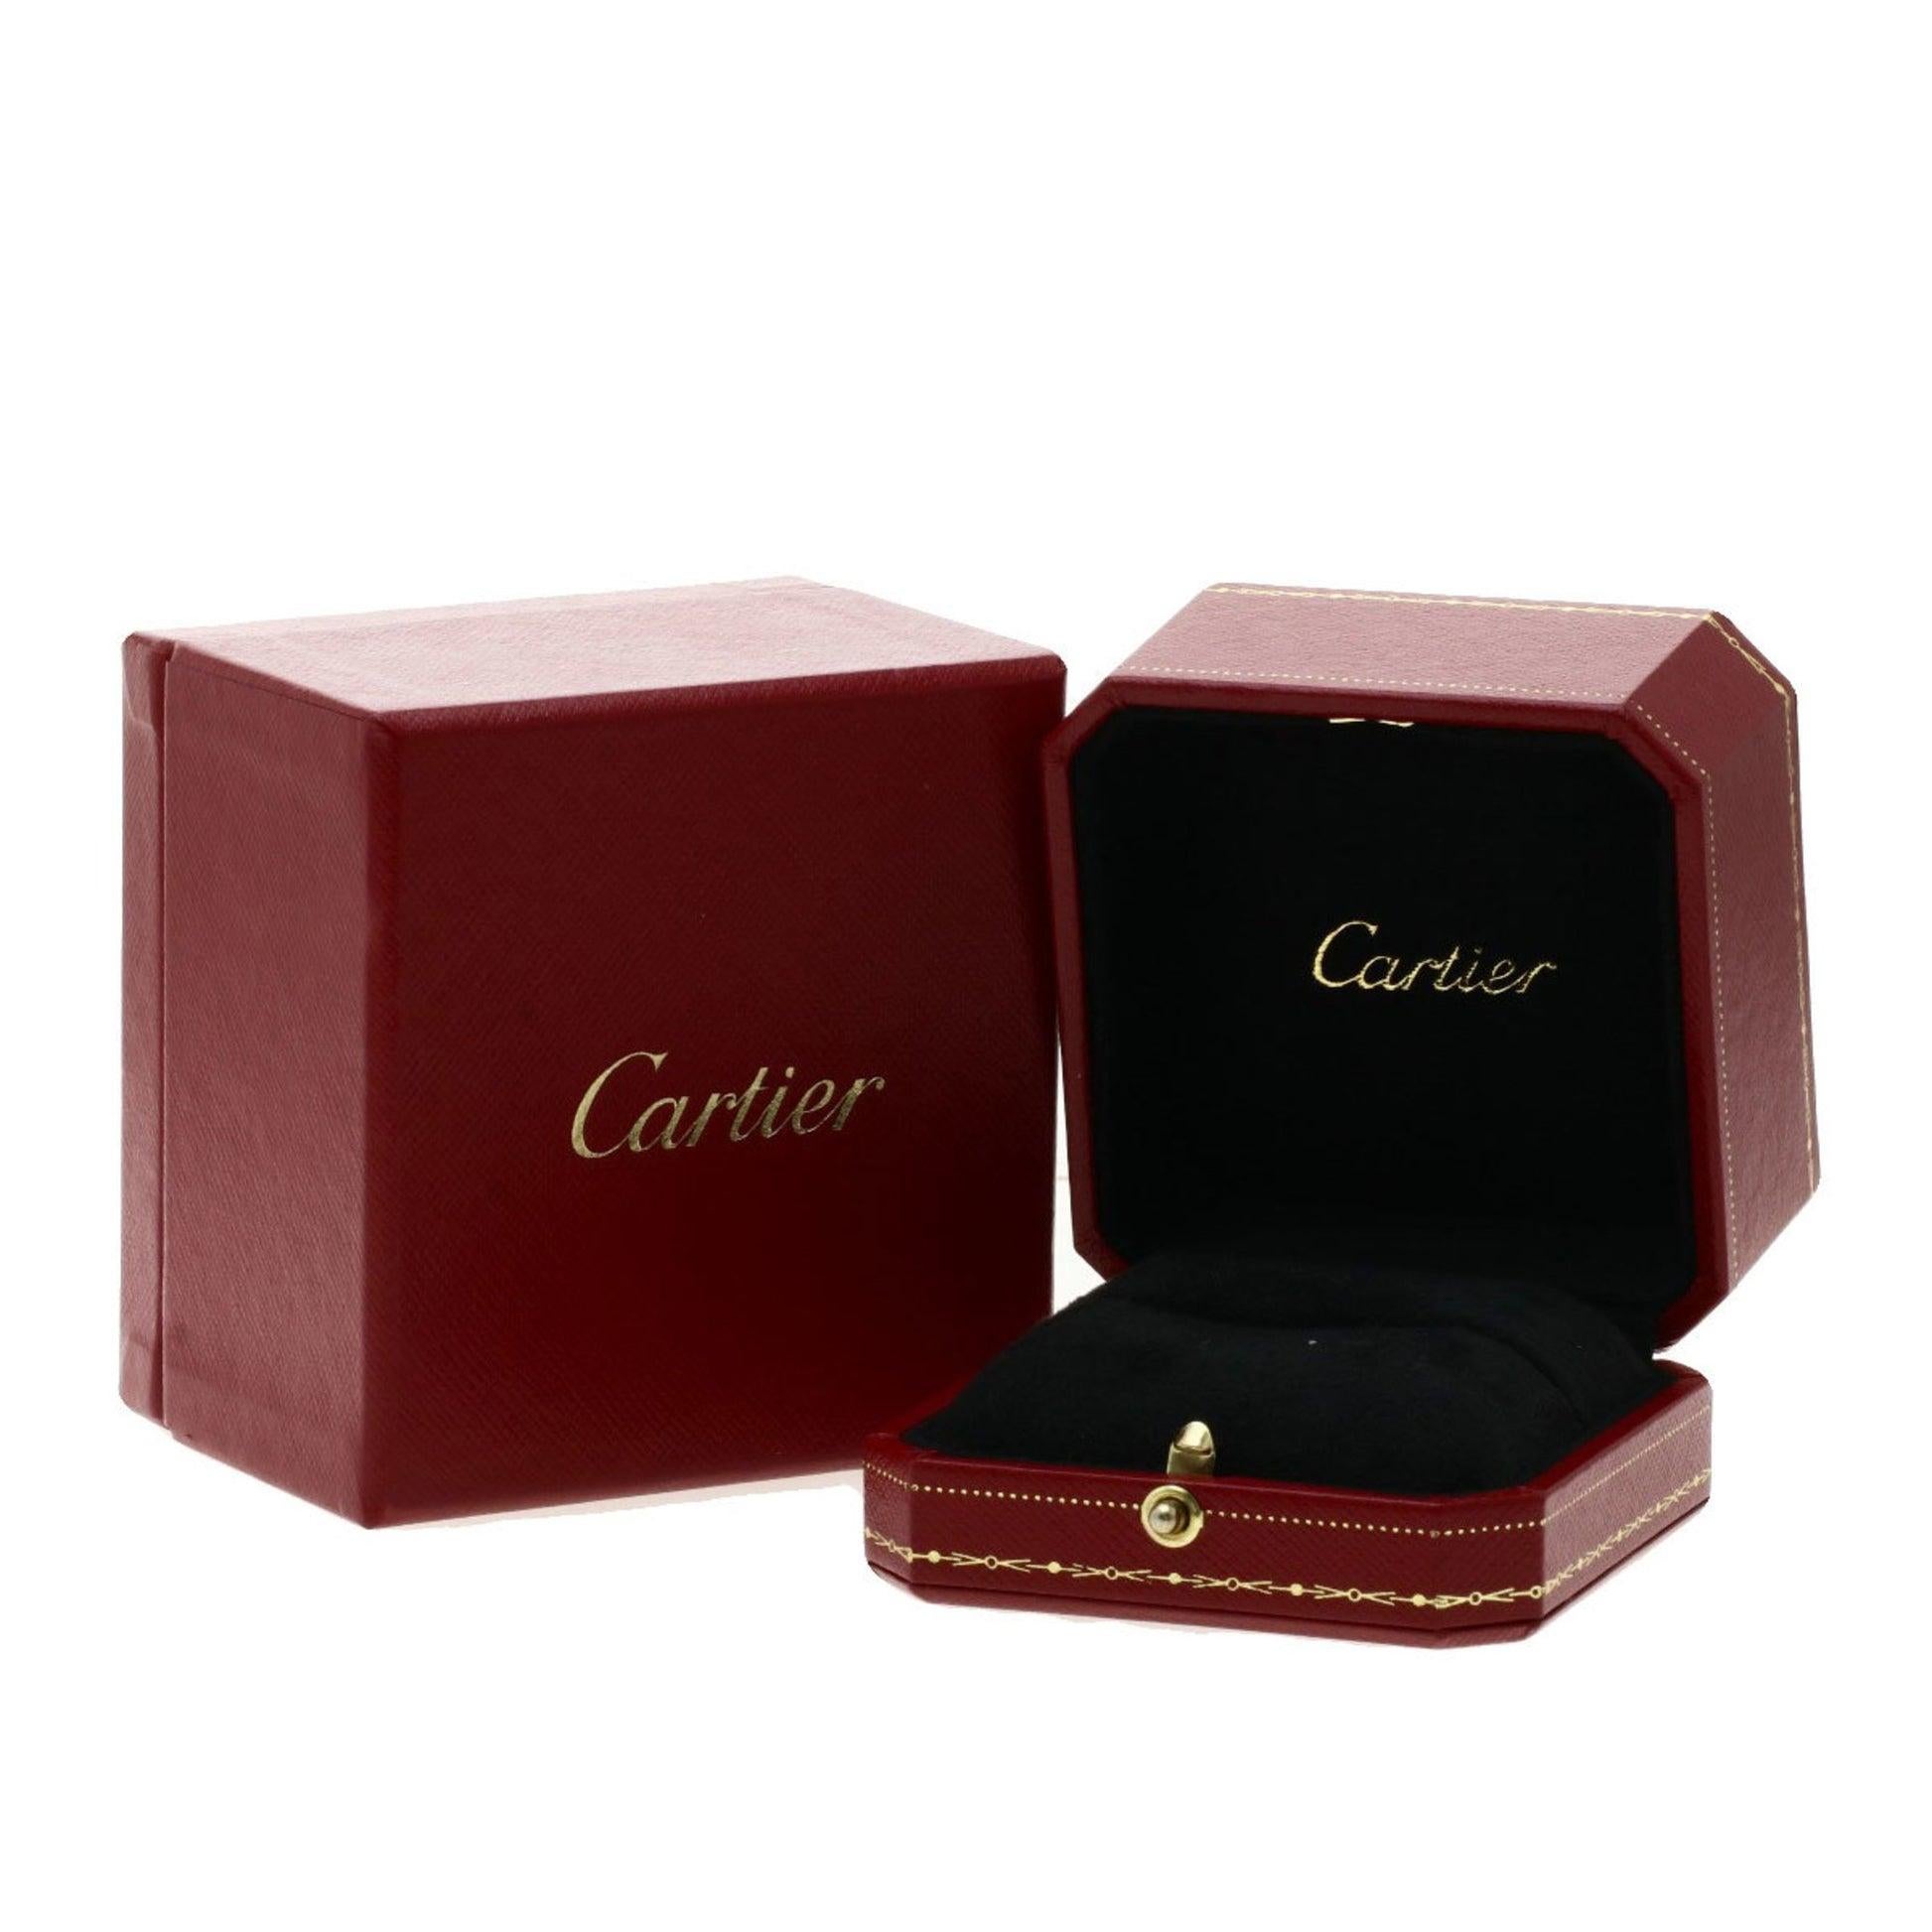 Cartier Valerina Solitaire Diamond Ring in Platinum

Additional Information:
Brand: Cartier
Gender: Women
Gemstone: Diamond
Material: Platinum 950
Ring size (US): 5.5
Condition: Good
Condition details: The item has been used and has some minor